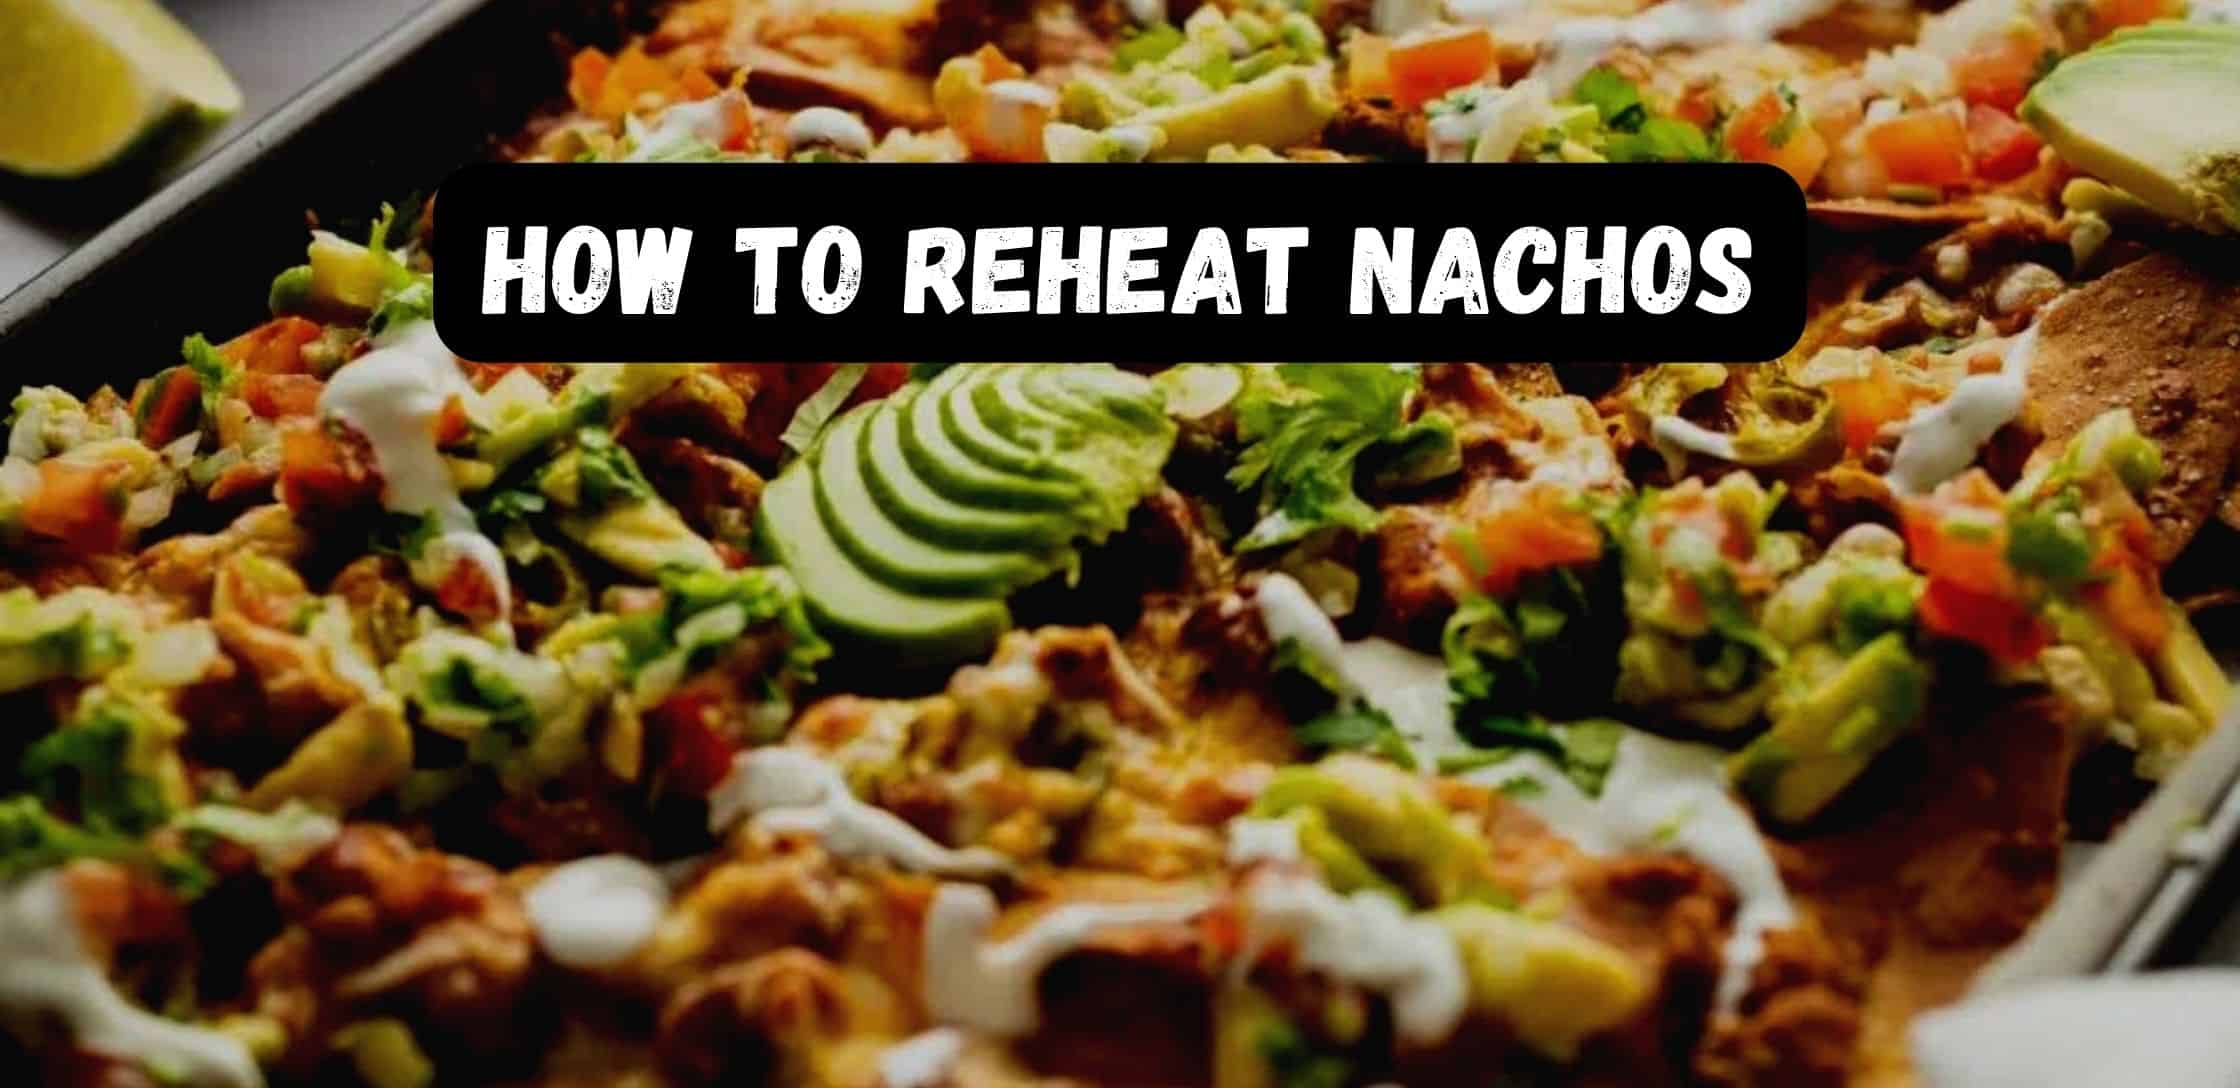 How to Reheat Nachos in the Oven: The Ultimate Guide.